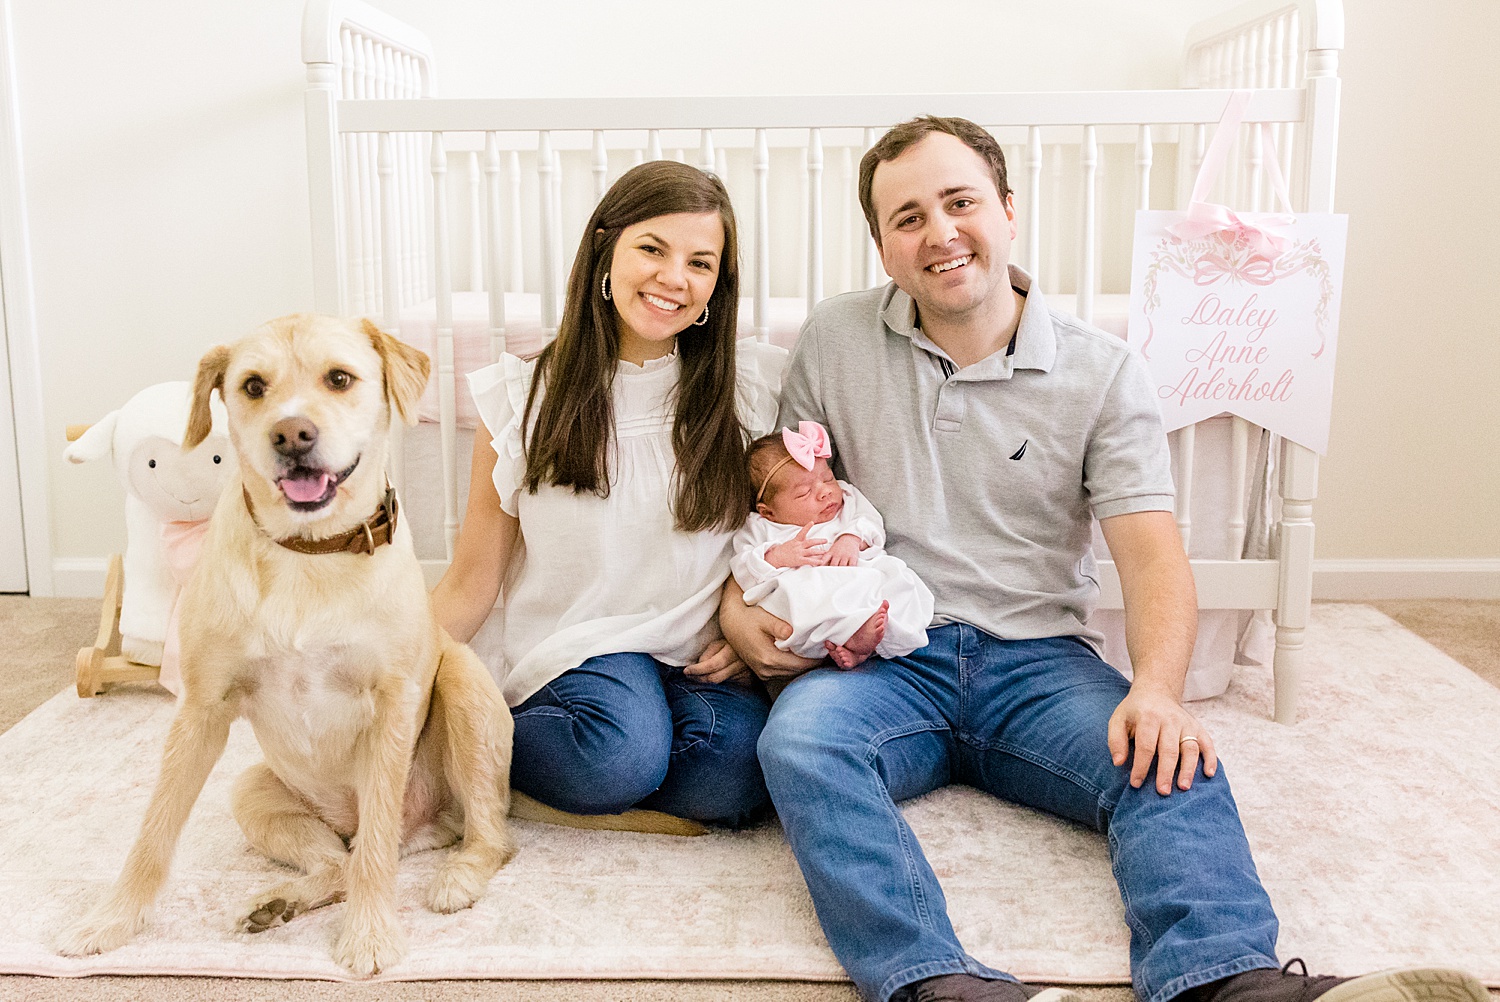 parents sit on nursery floor holding newborn girl with their family dog nearby